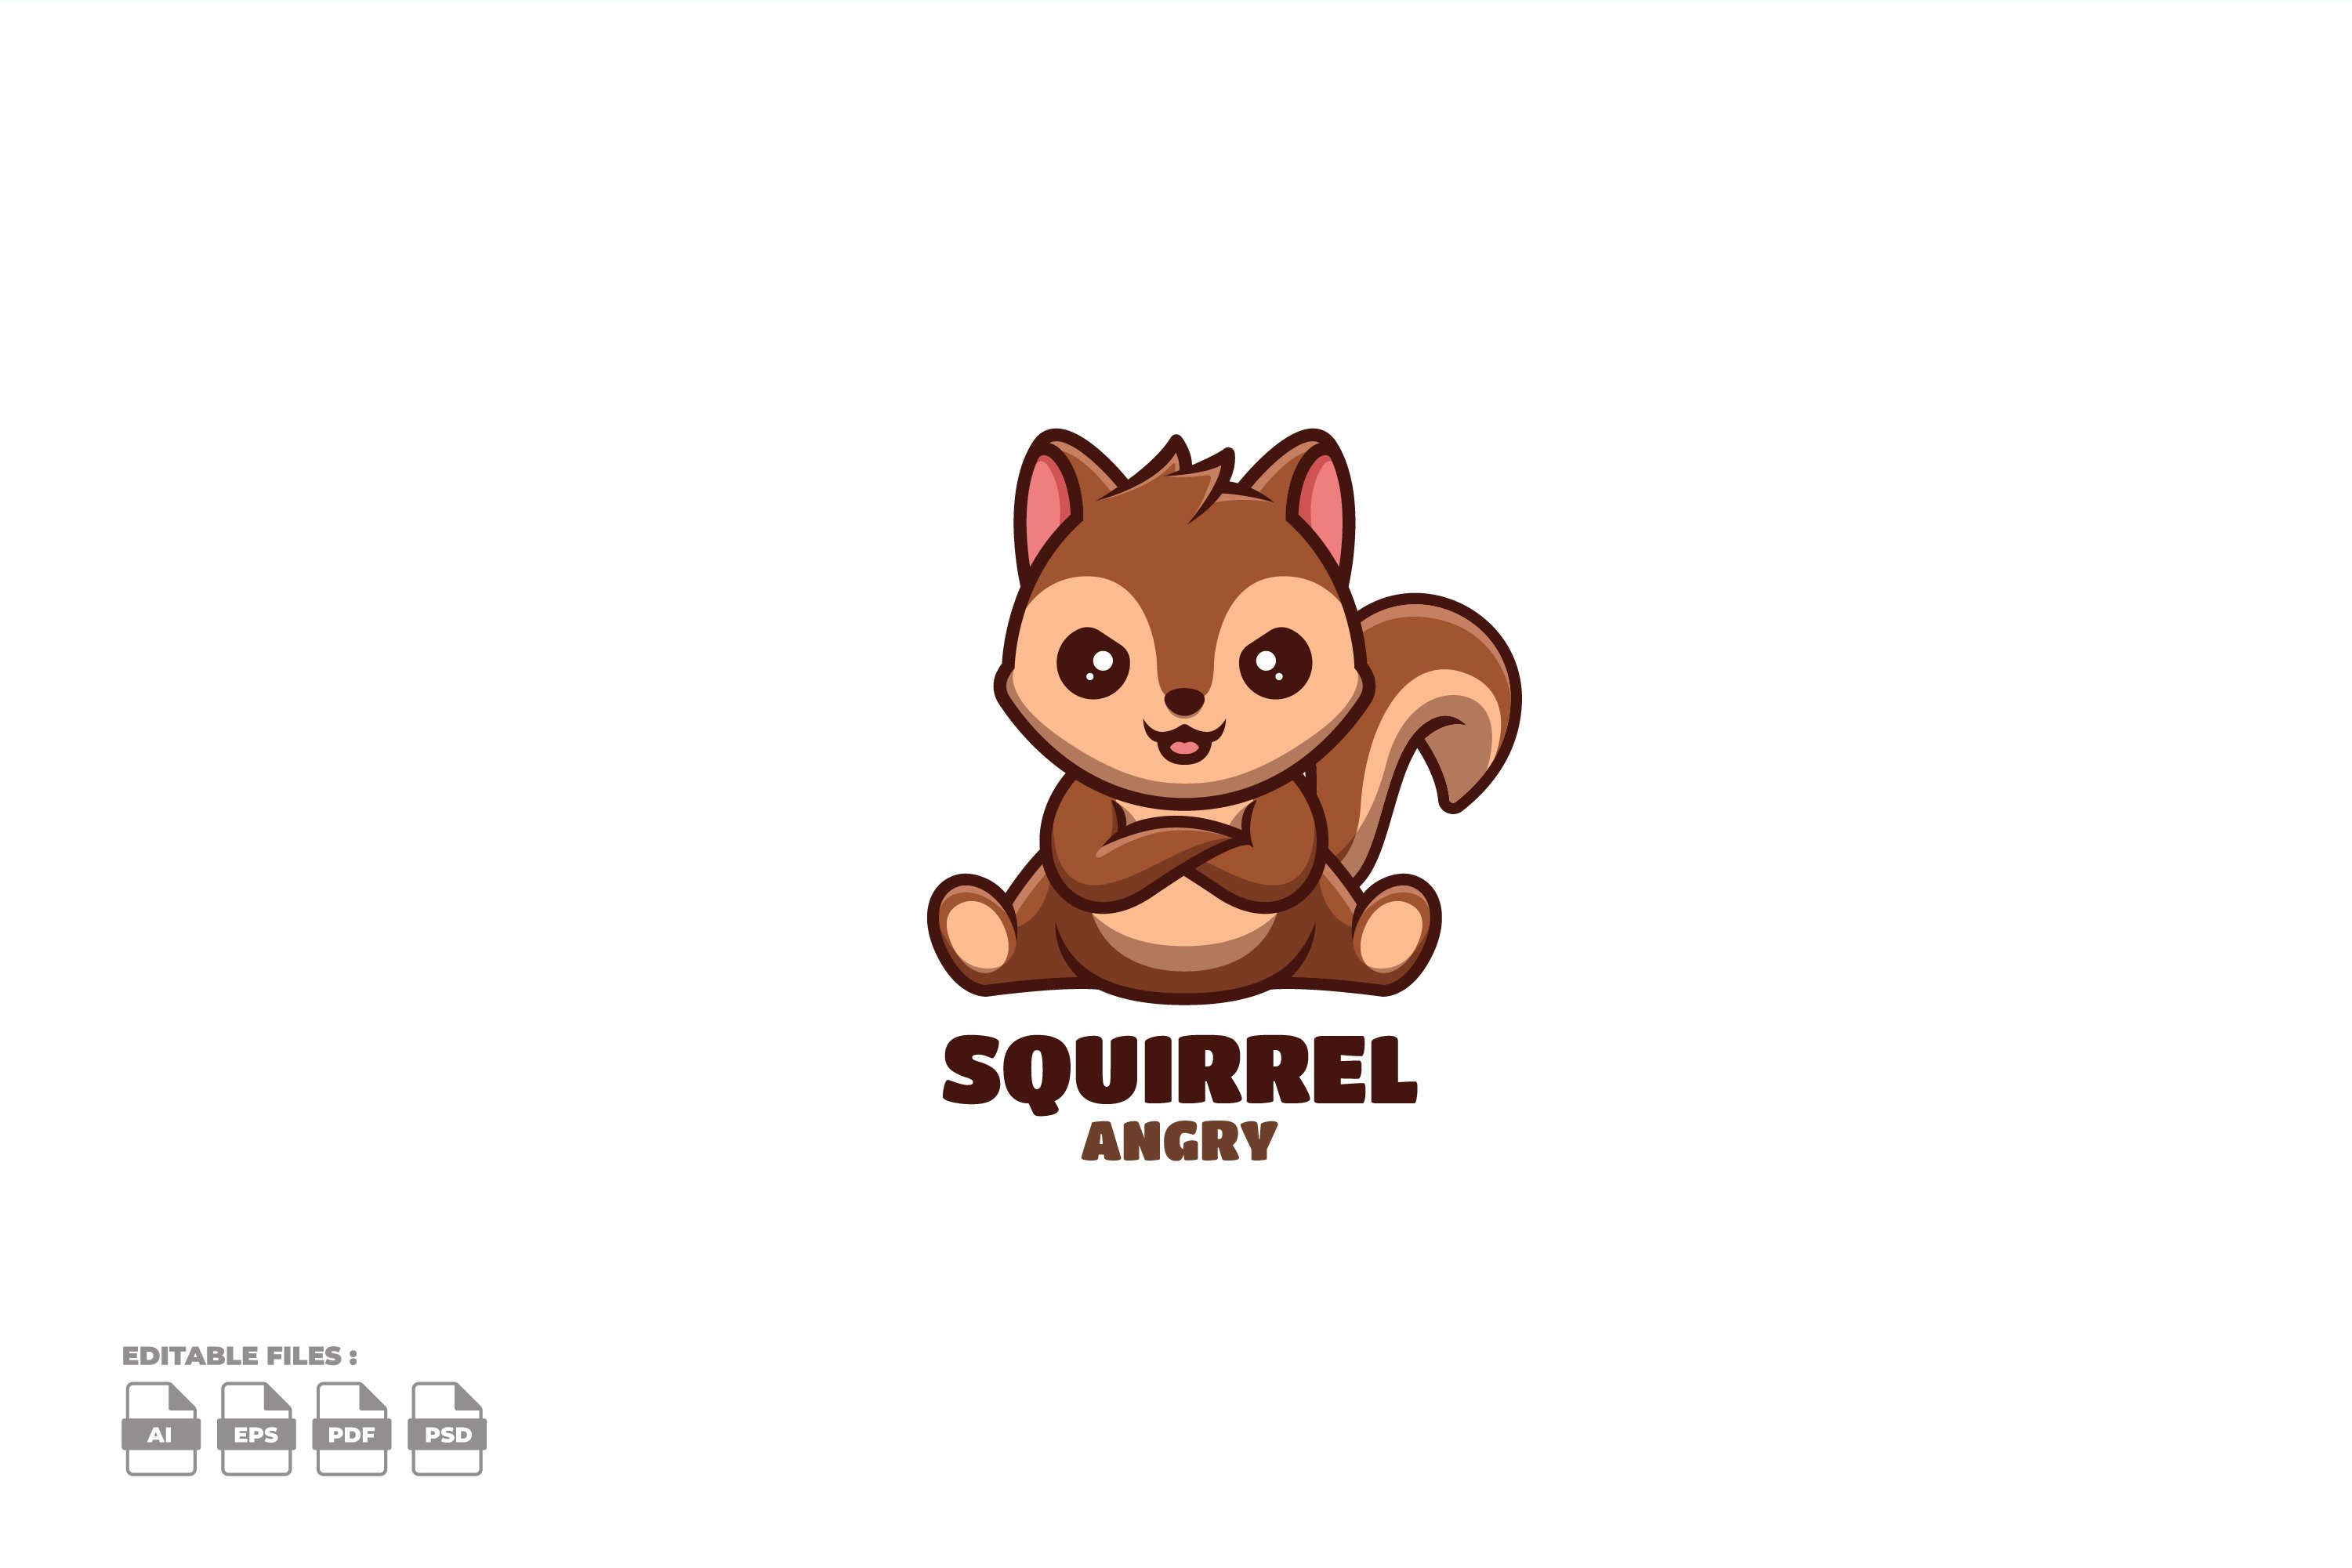 Angry Squirrel Cute Mascot Logo cover image.